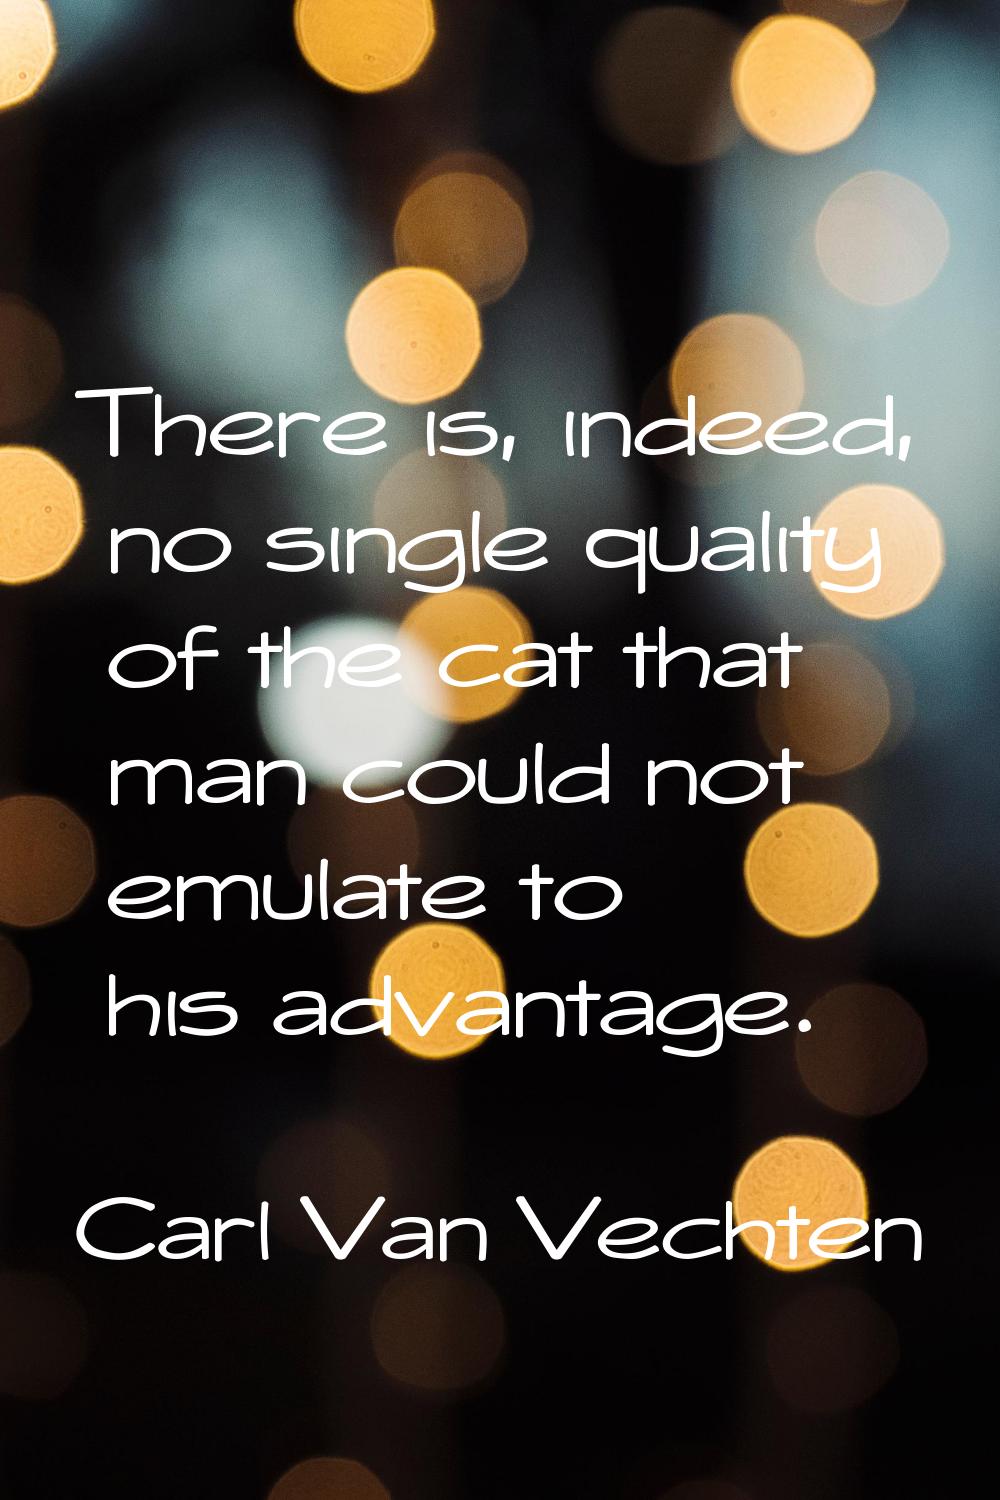 There is, indeed, no single quality of the cat that man could not emulate to his advantage.